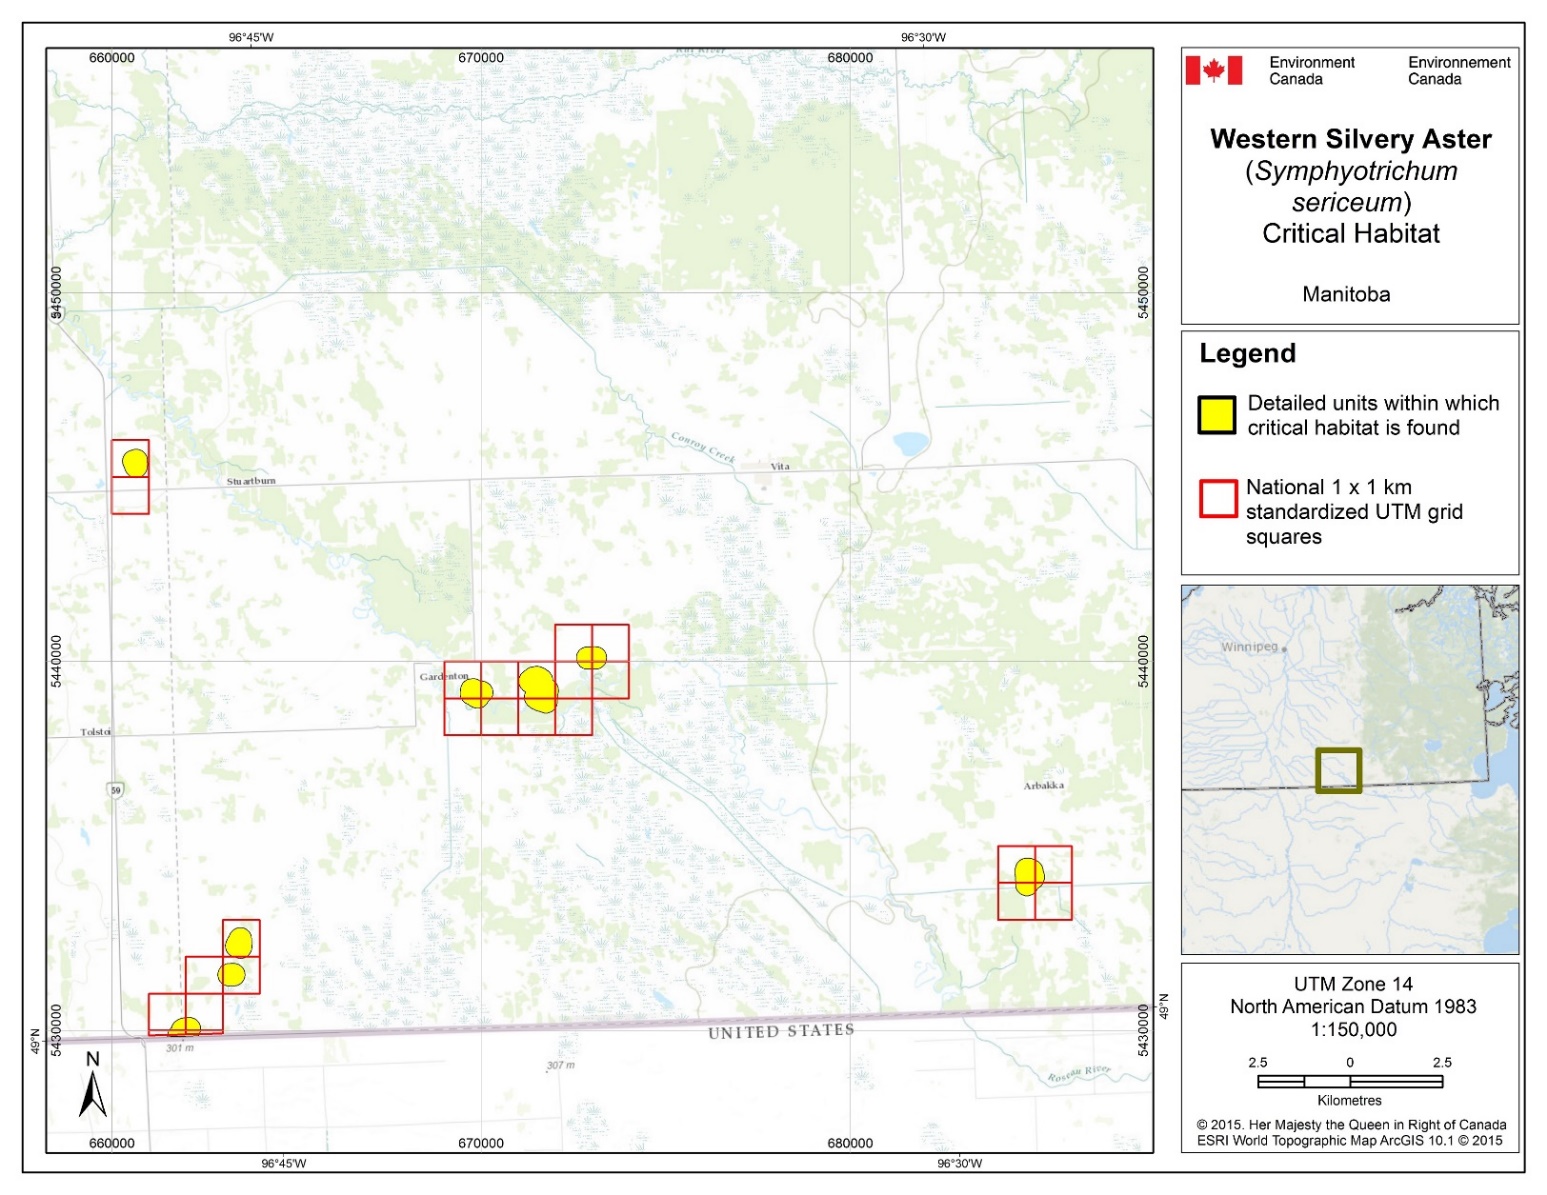 Figure B1: Map of Critical habitat for Western Silvery Aster in Manitoba